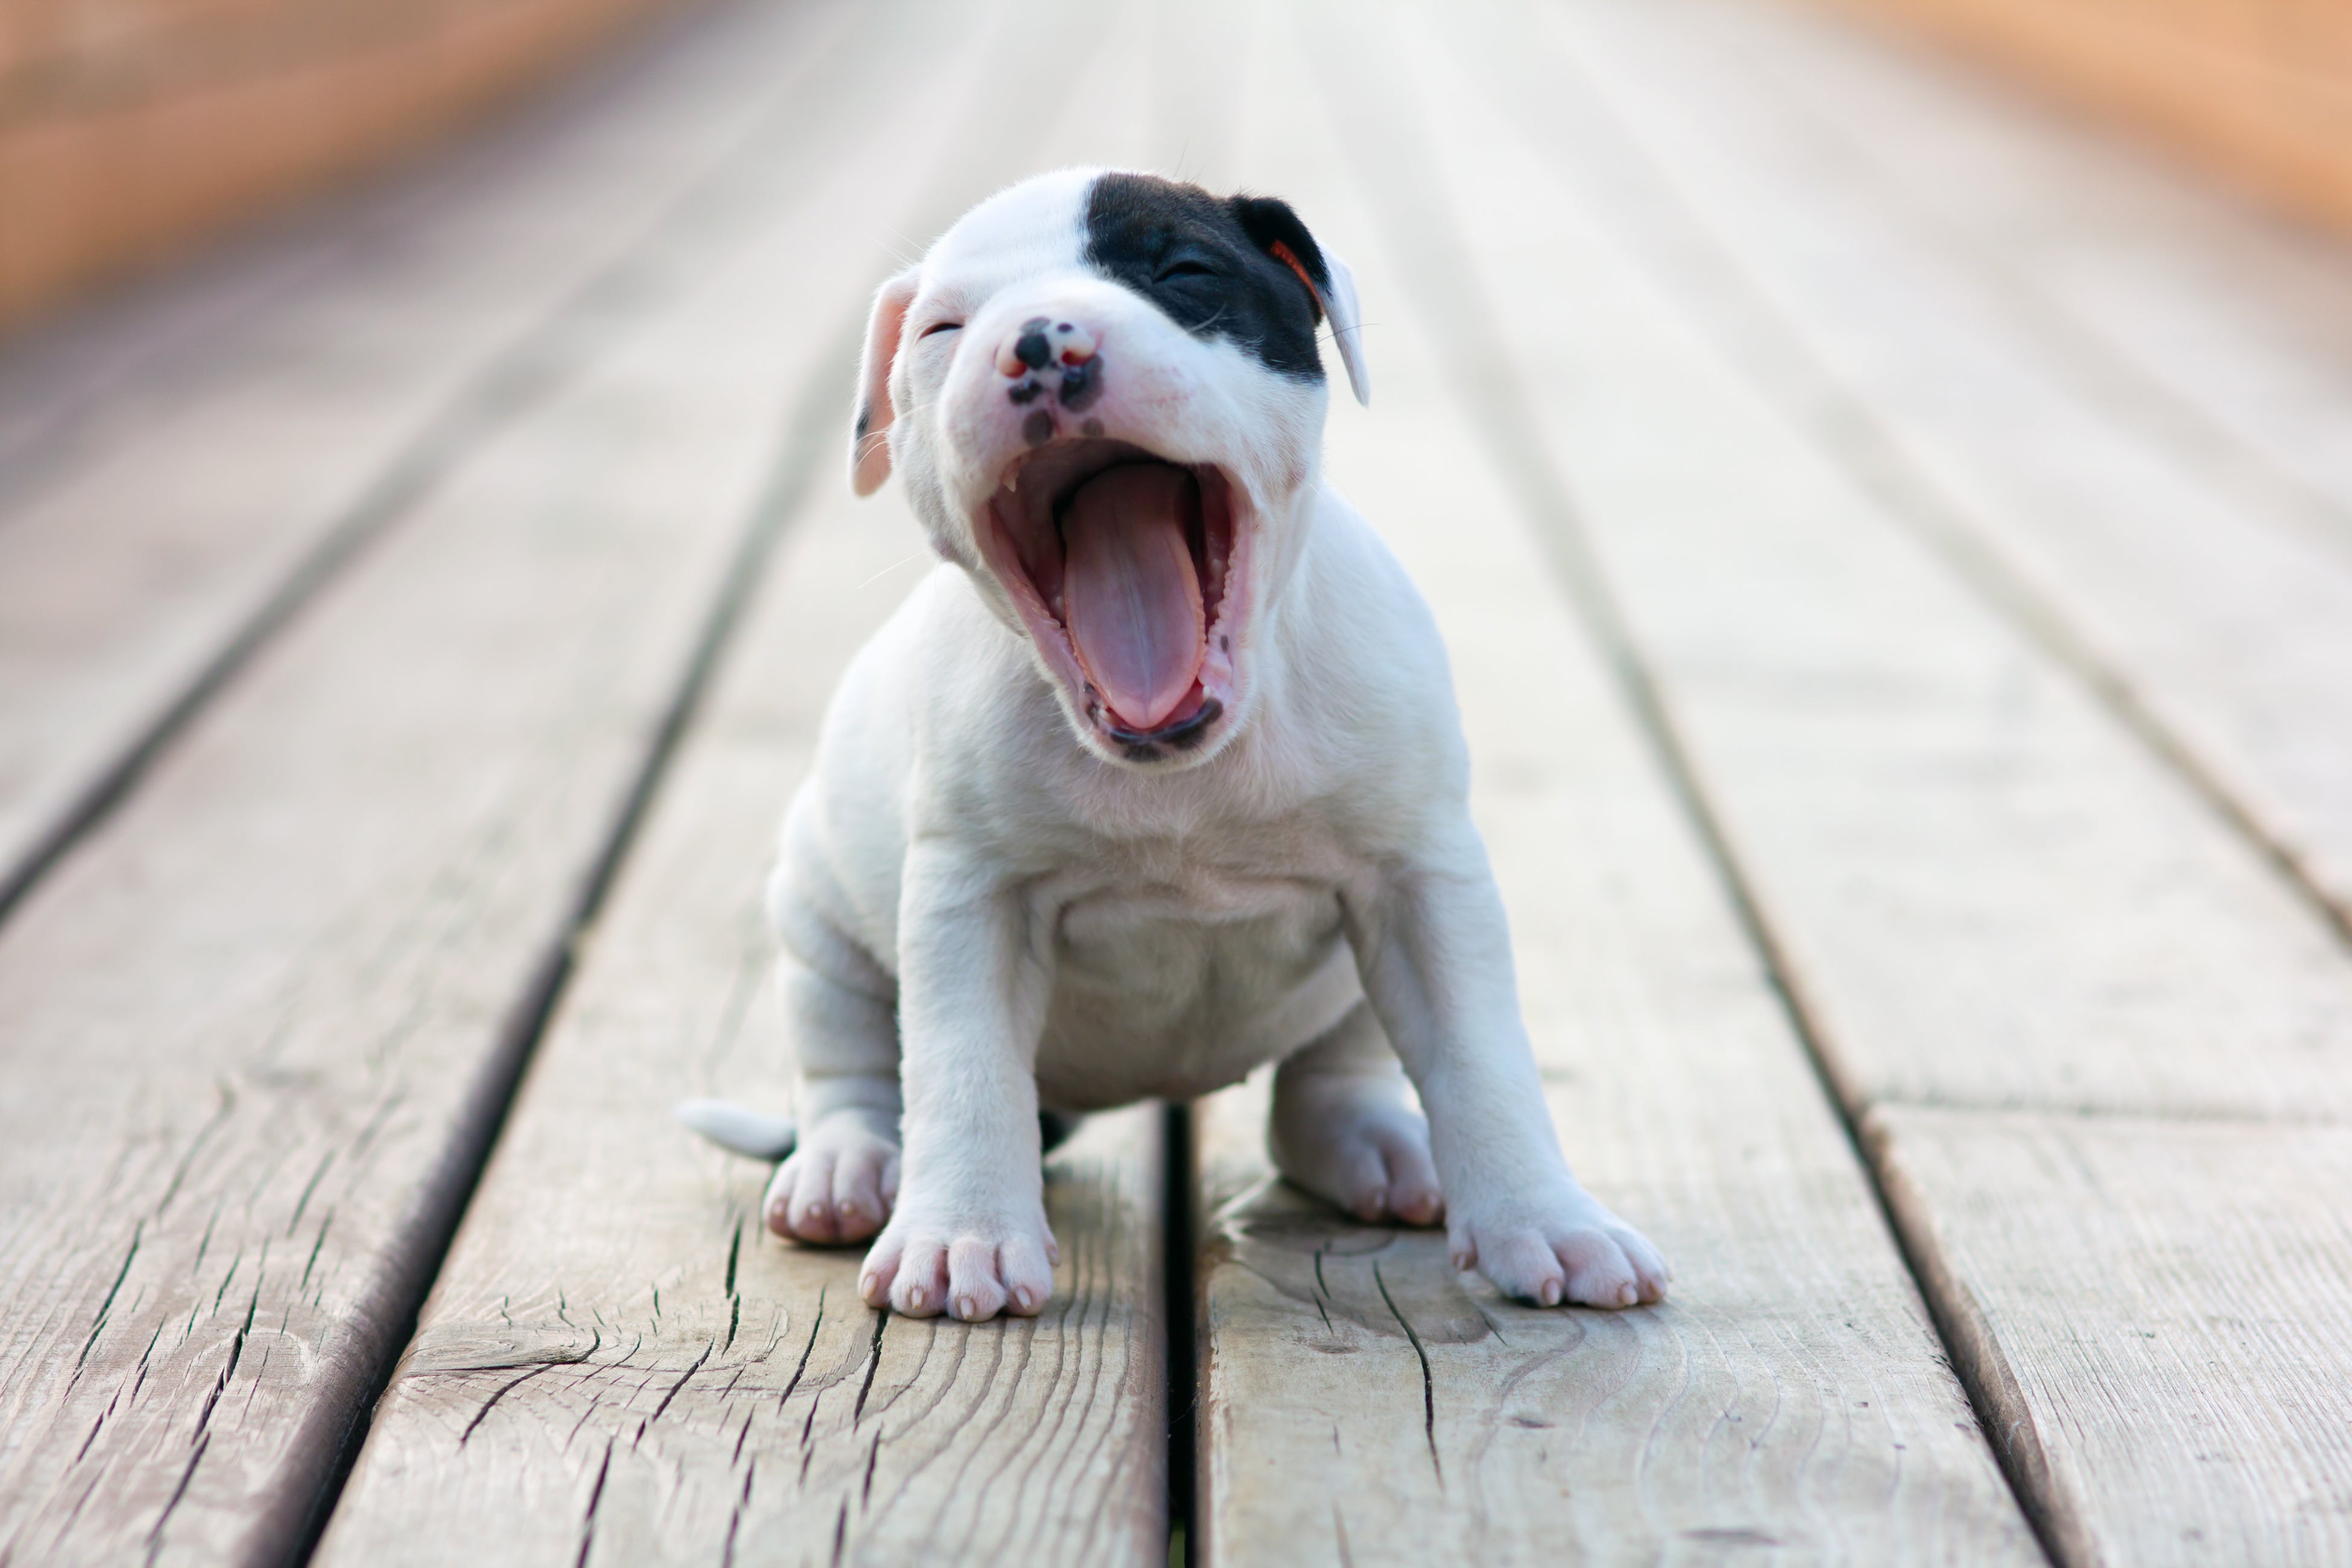 Adorable puppy yawning